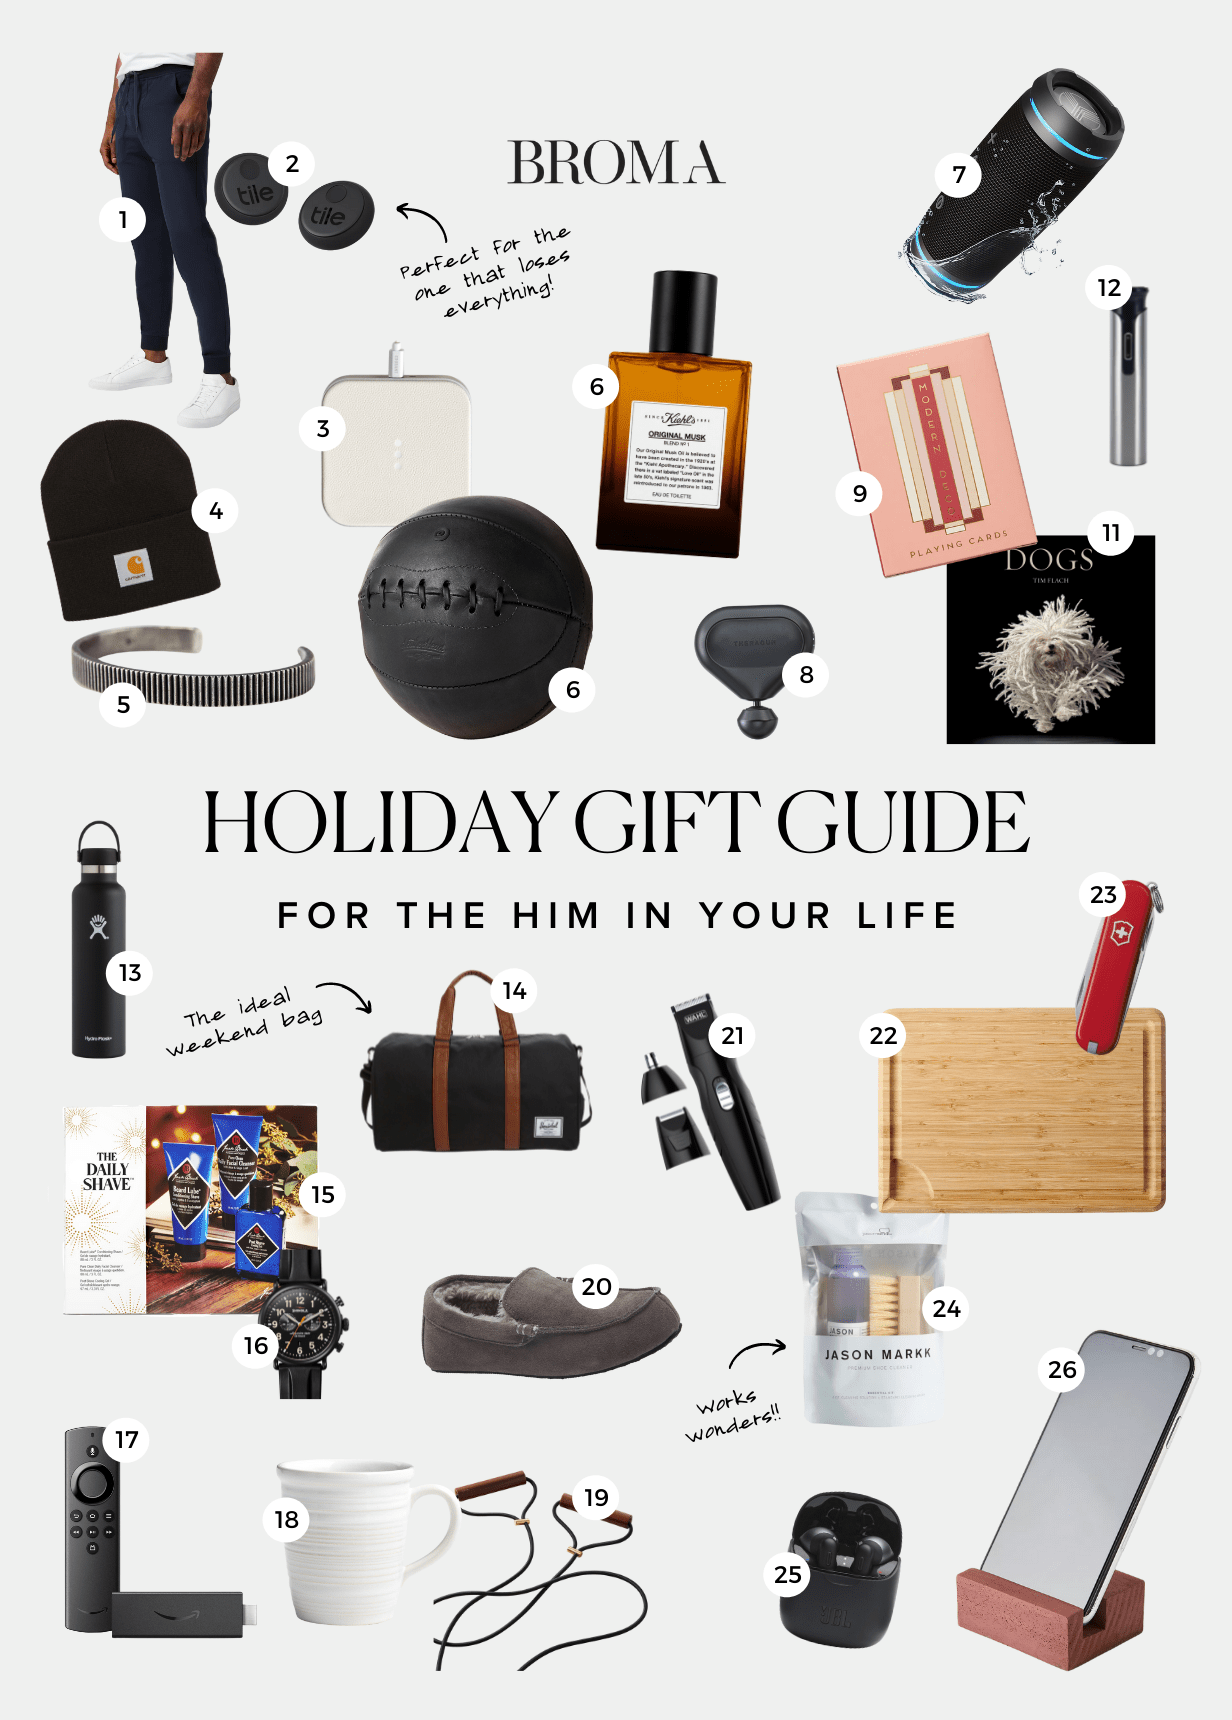 18 Gift Ideas for Him and Her This Holiday